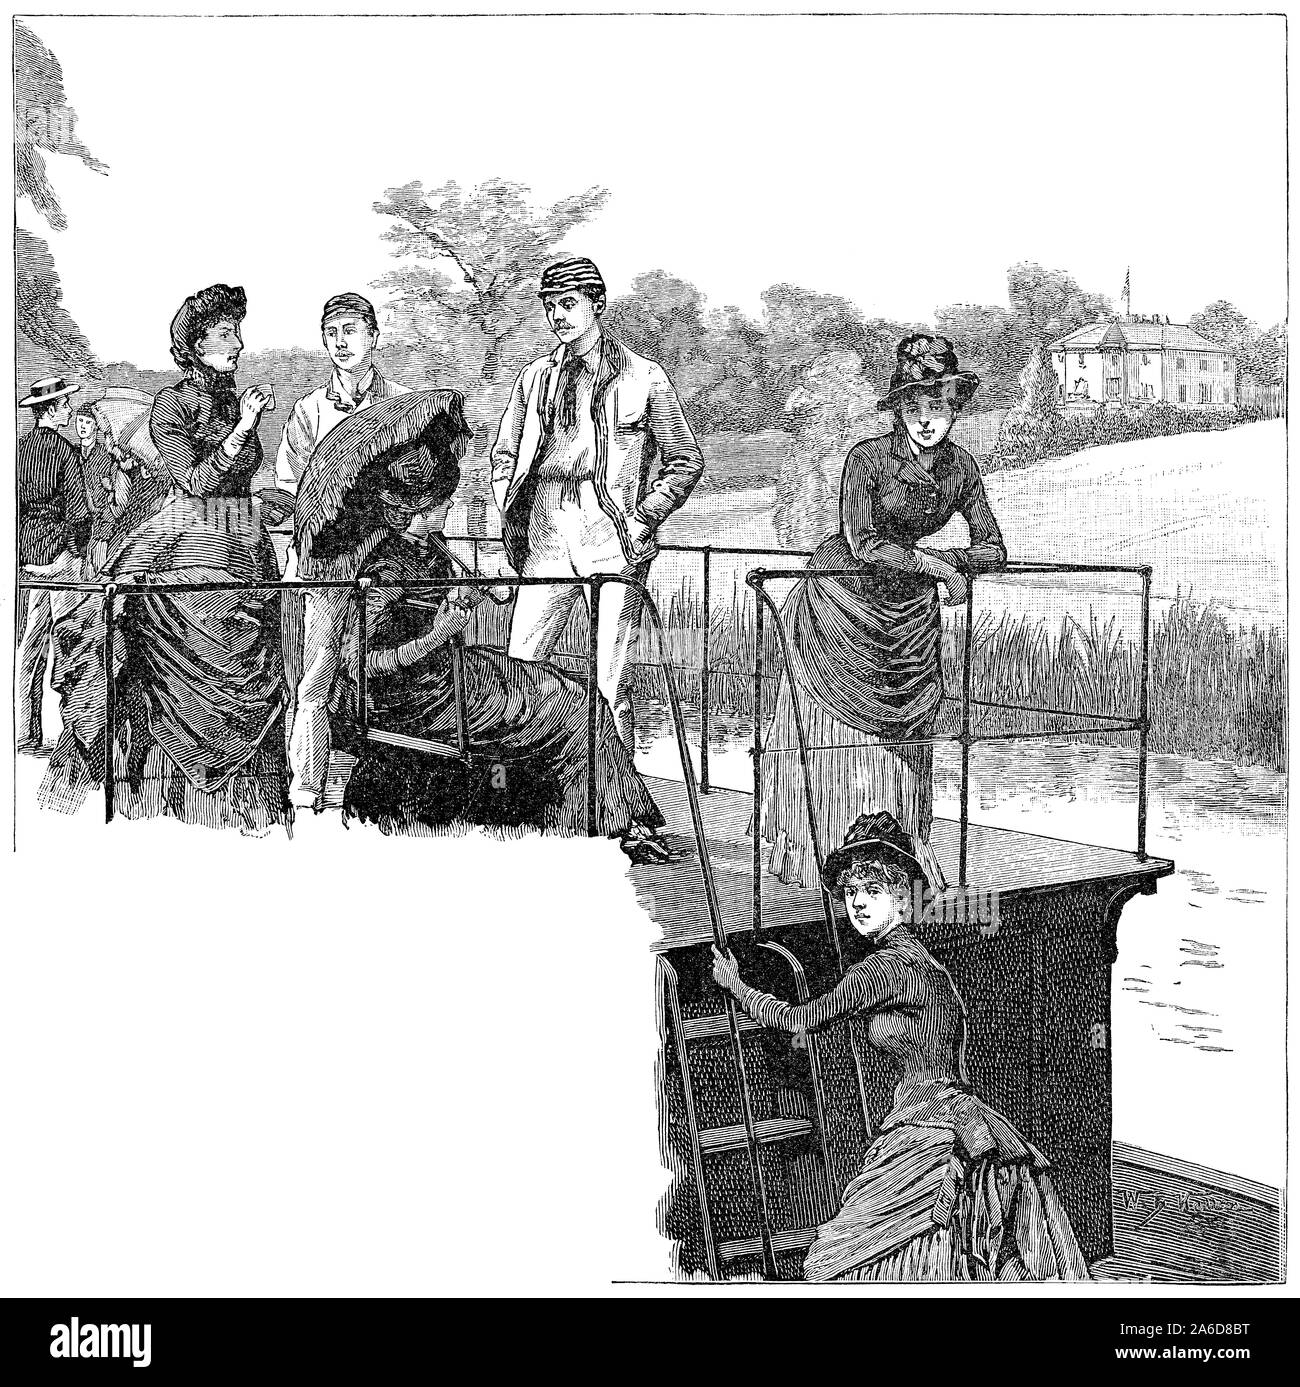 1891 engraving of a pleasure cruise on the River Thames at Nuneham Courtenay, Oxfordshire, England. Stock Photo